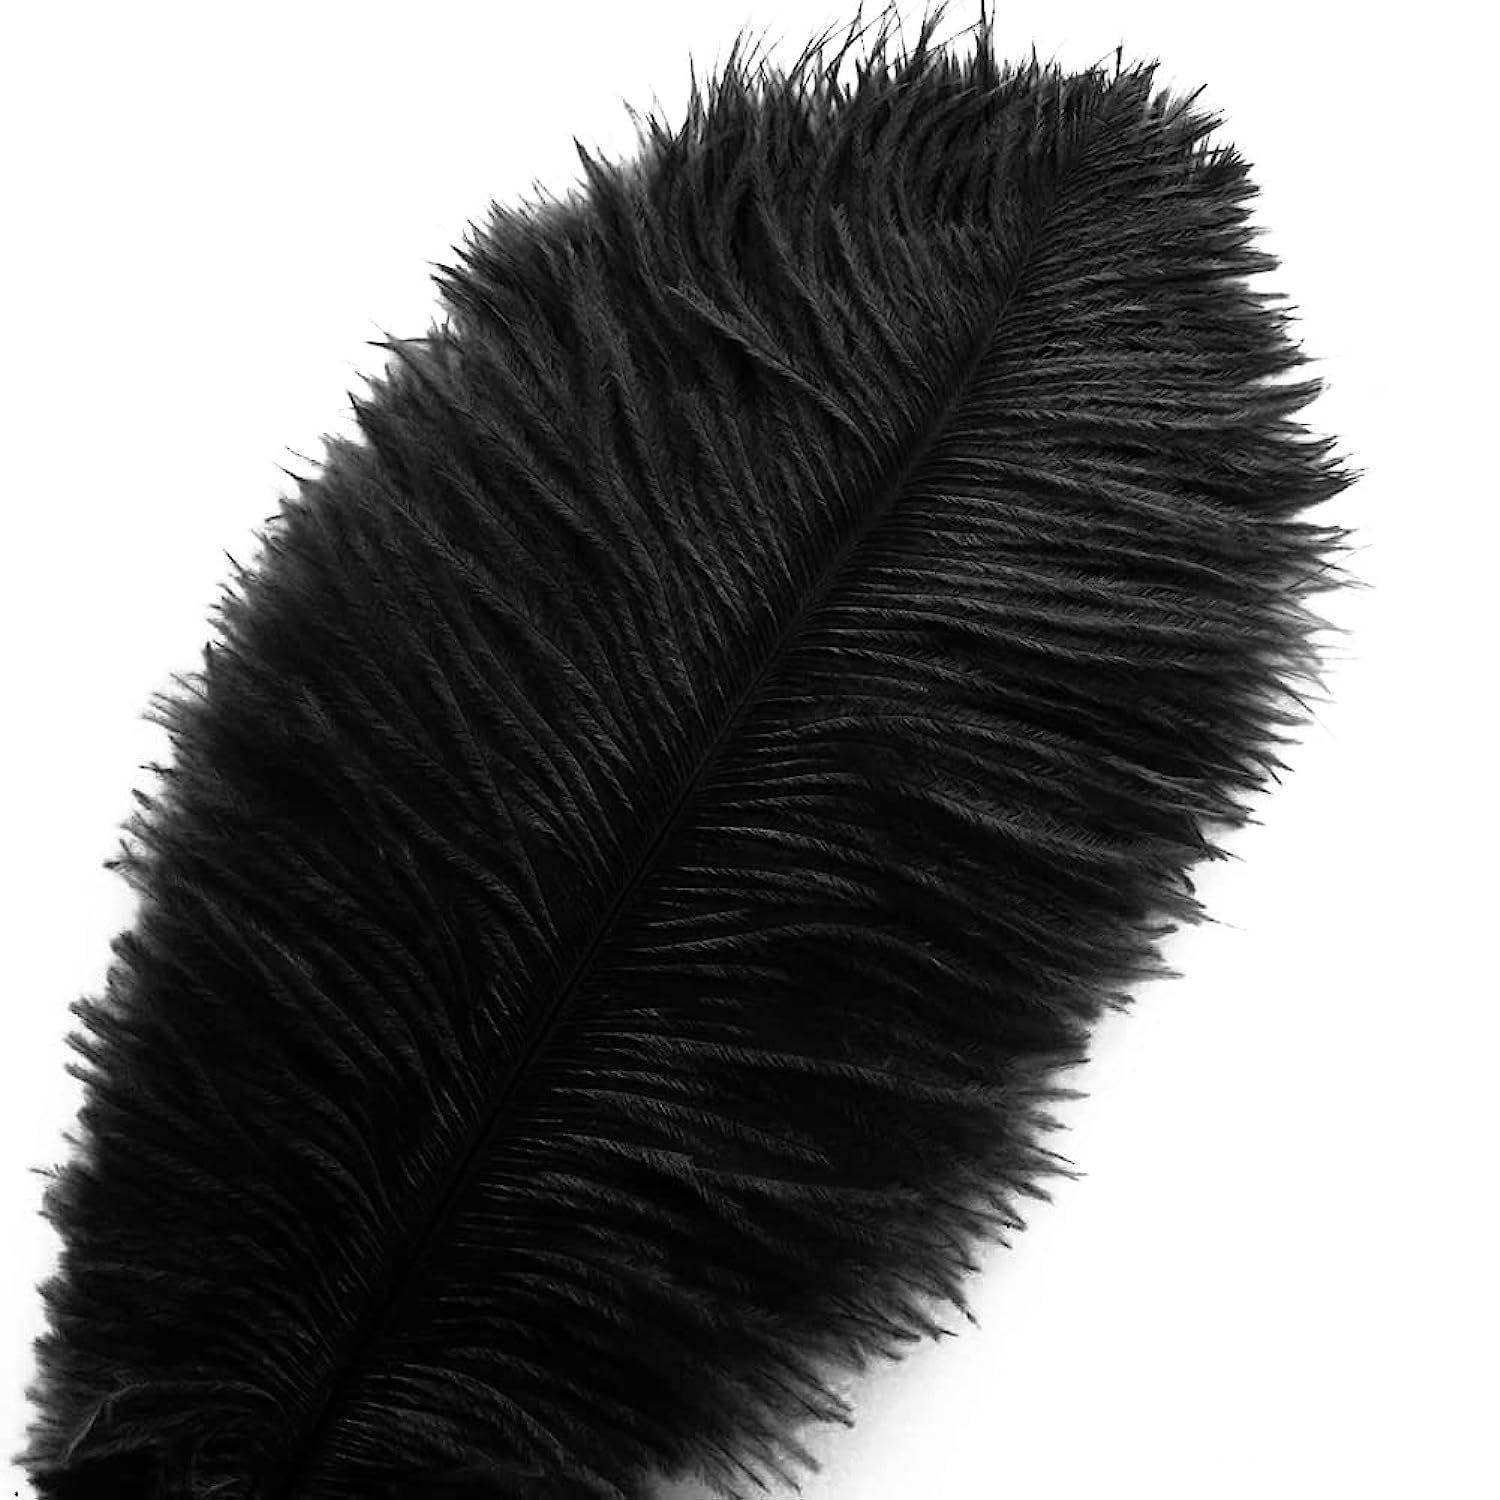 10pcs Black Ostrich Feathers for Crafts 12-14 Inches (25-30 cm) Natural Feathers Bulk for Home Decoration DIY, Wedding Party Centerpieces and Flower